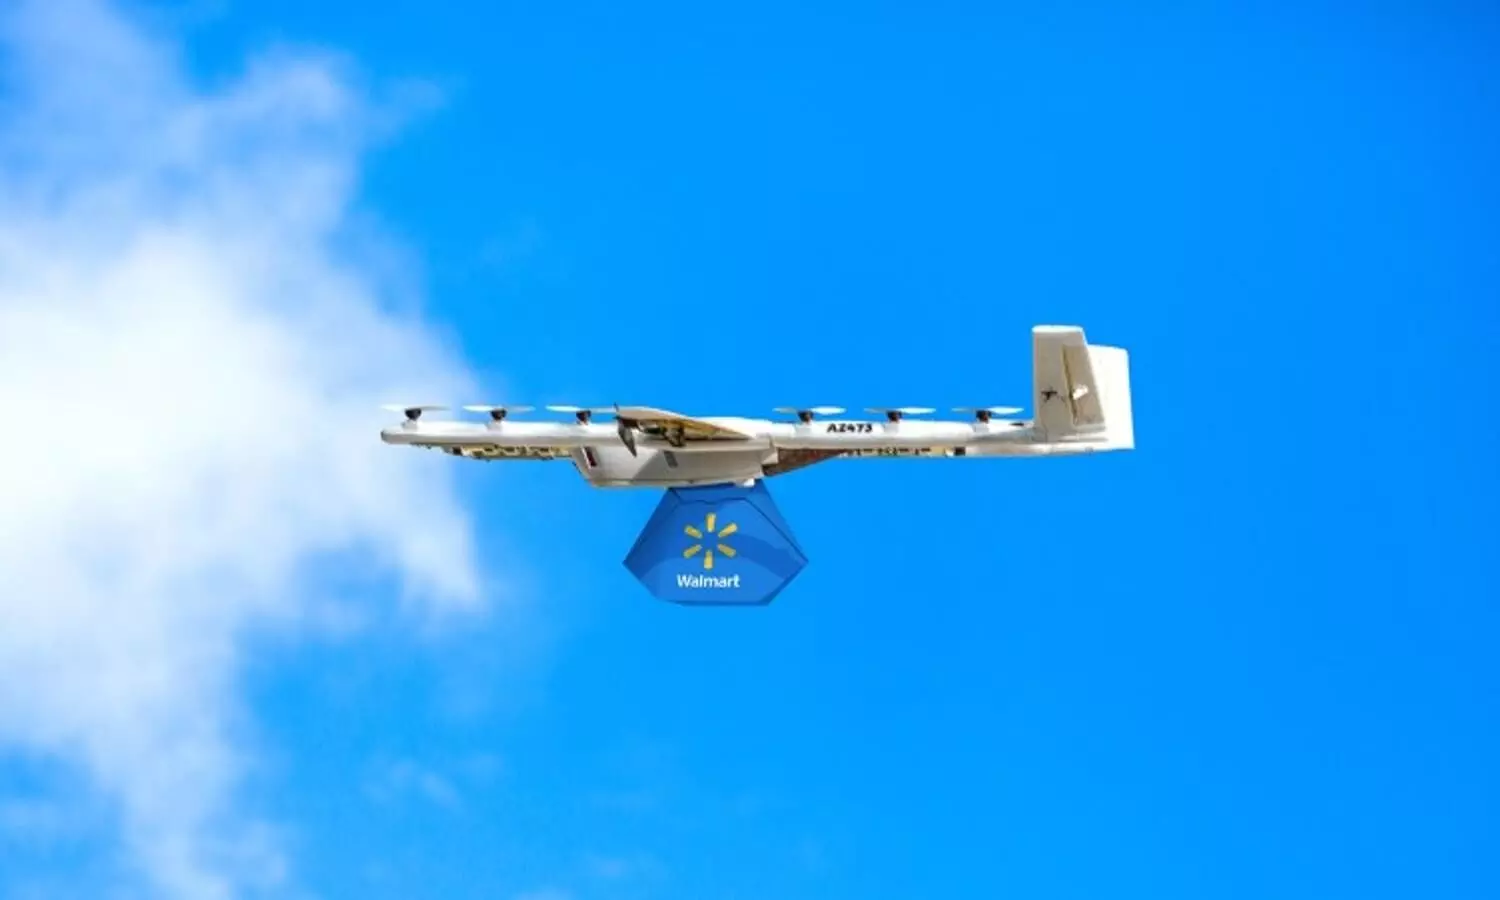 Wing, Walmart to offer drone deliveries in Dallas metro